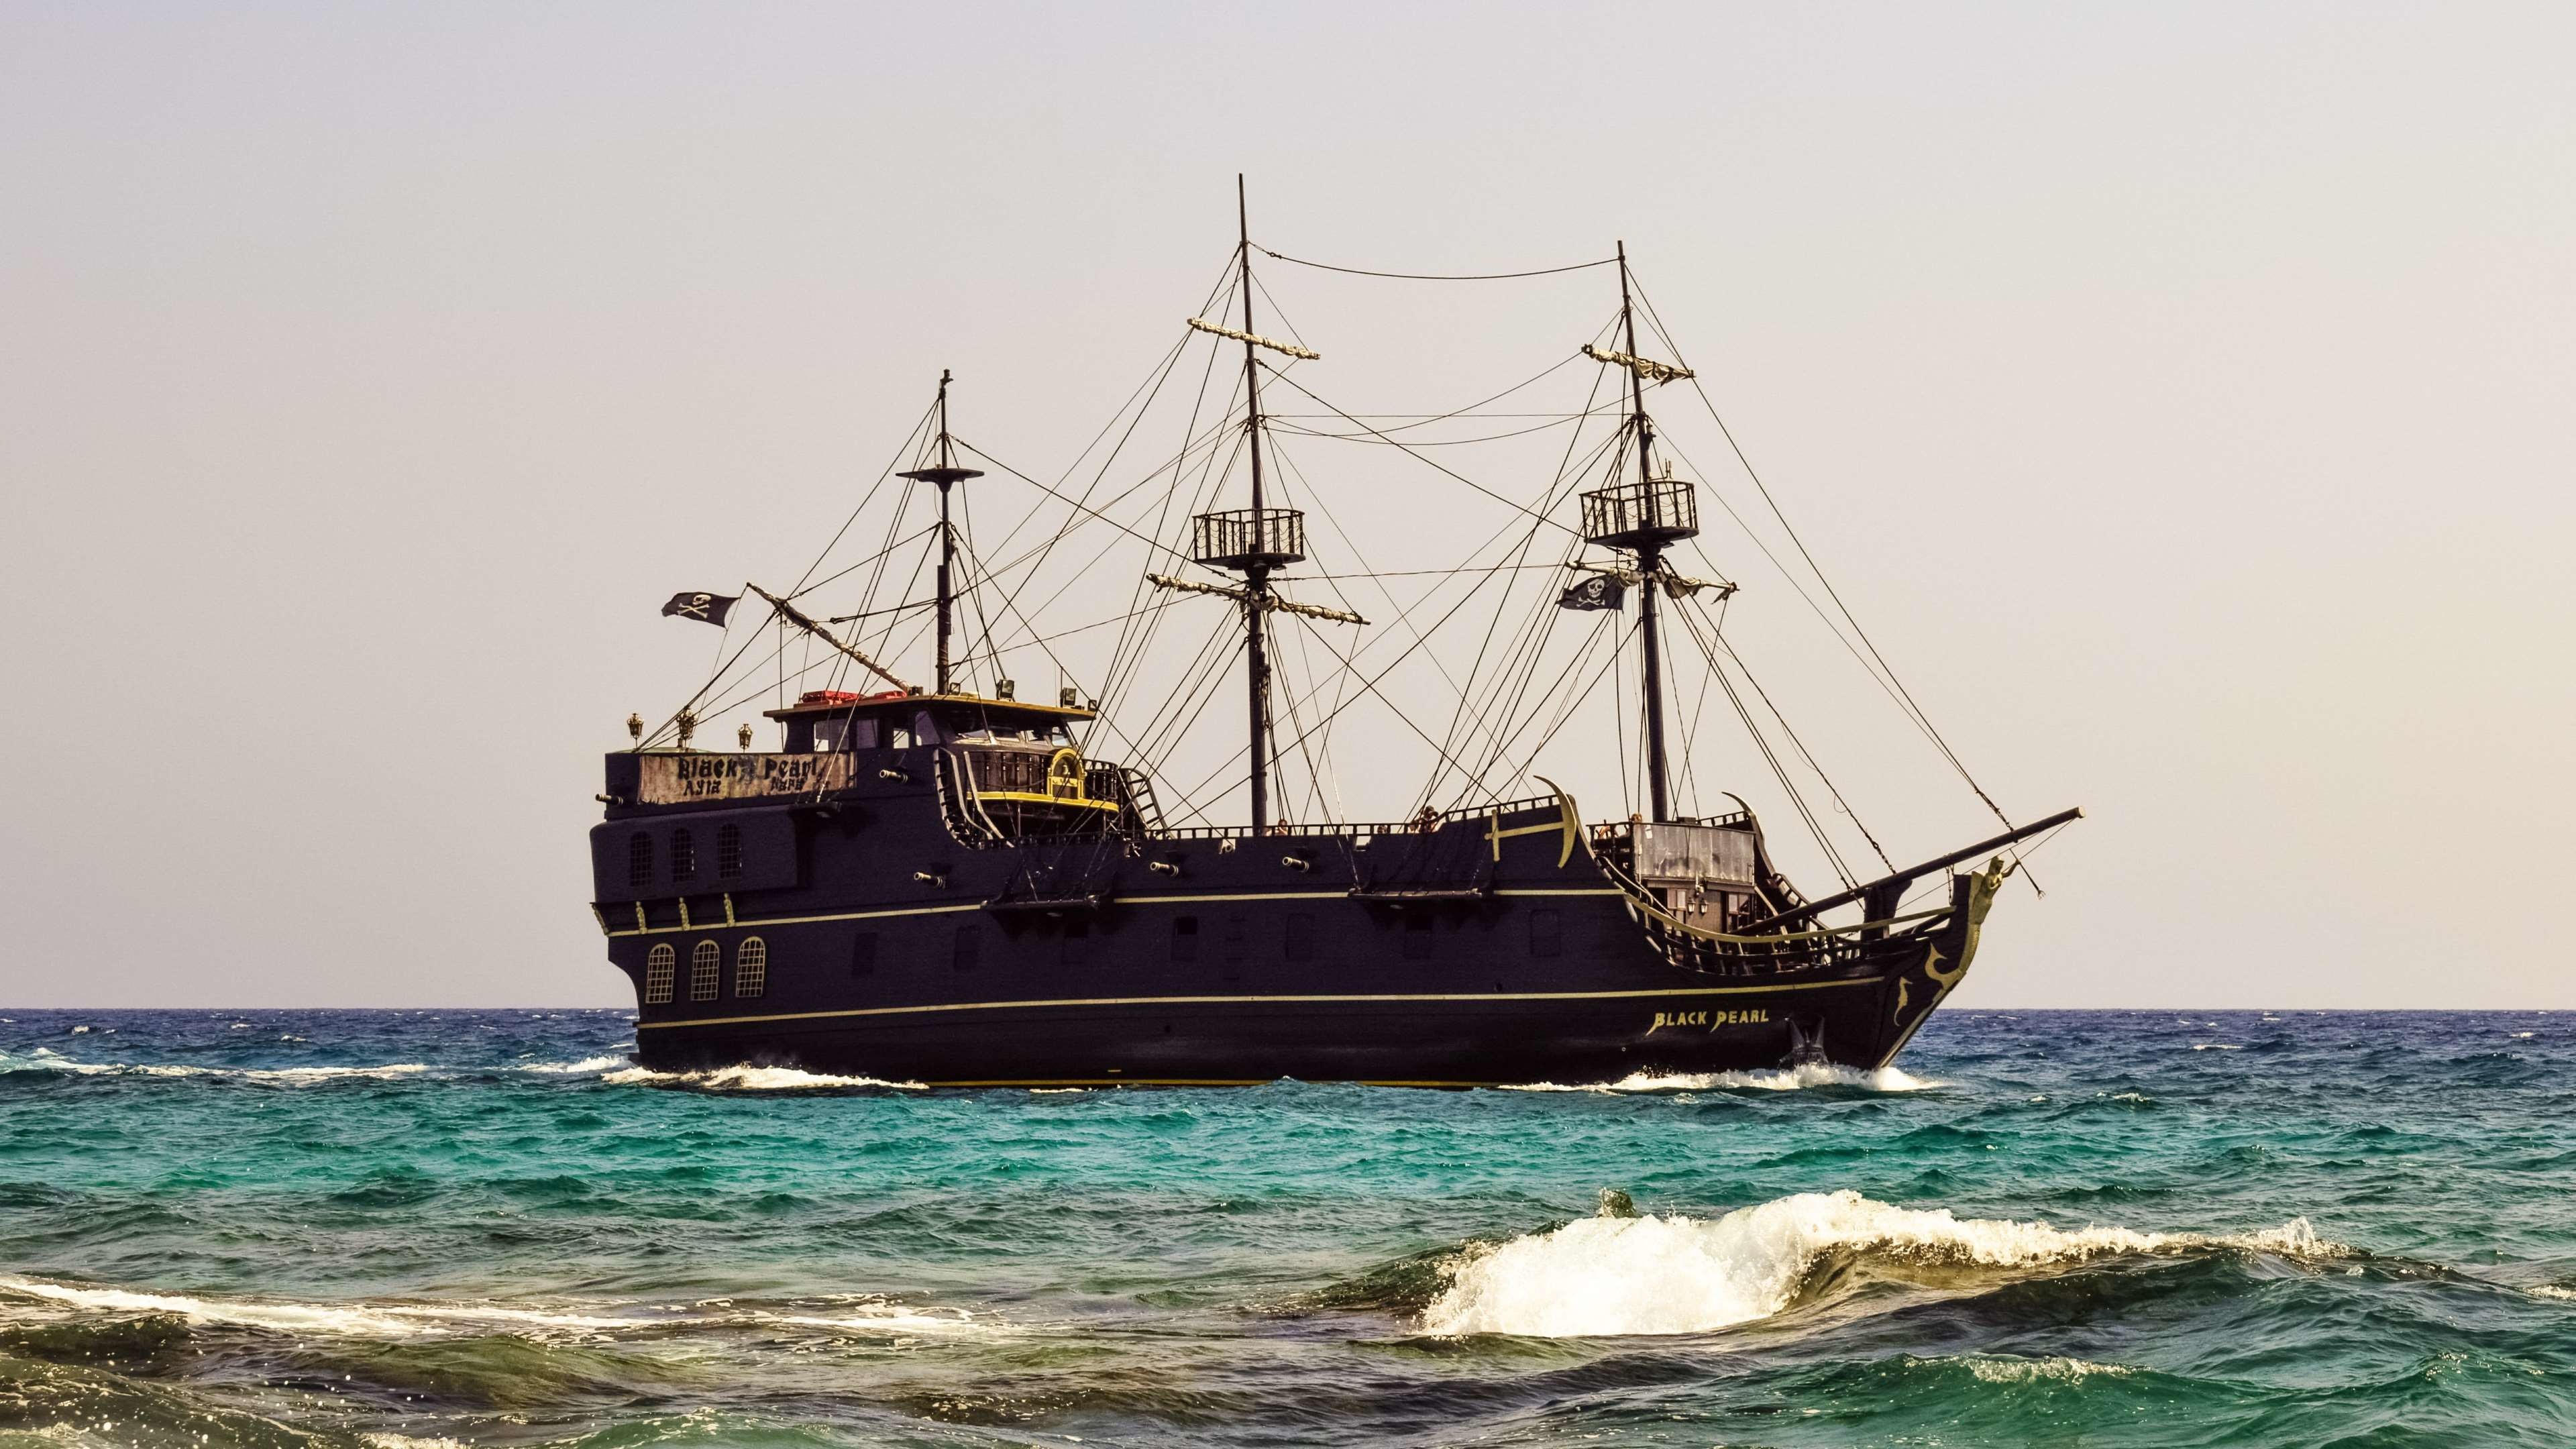 3840x2160  ayia napa, black pearl, cruise ship, cyprus, holiday, pirate  ship, recreation, sea, tourism, vacation, wave 4k wallpaper and background  JPG 620 kB